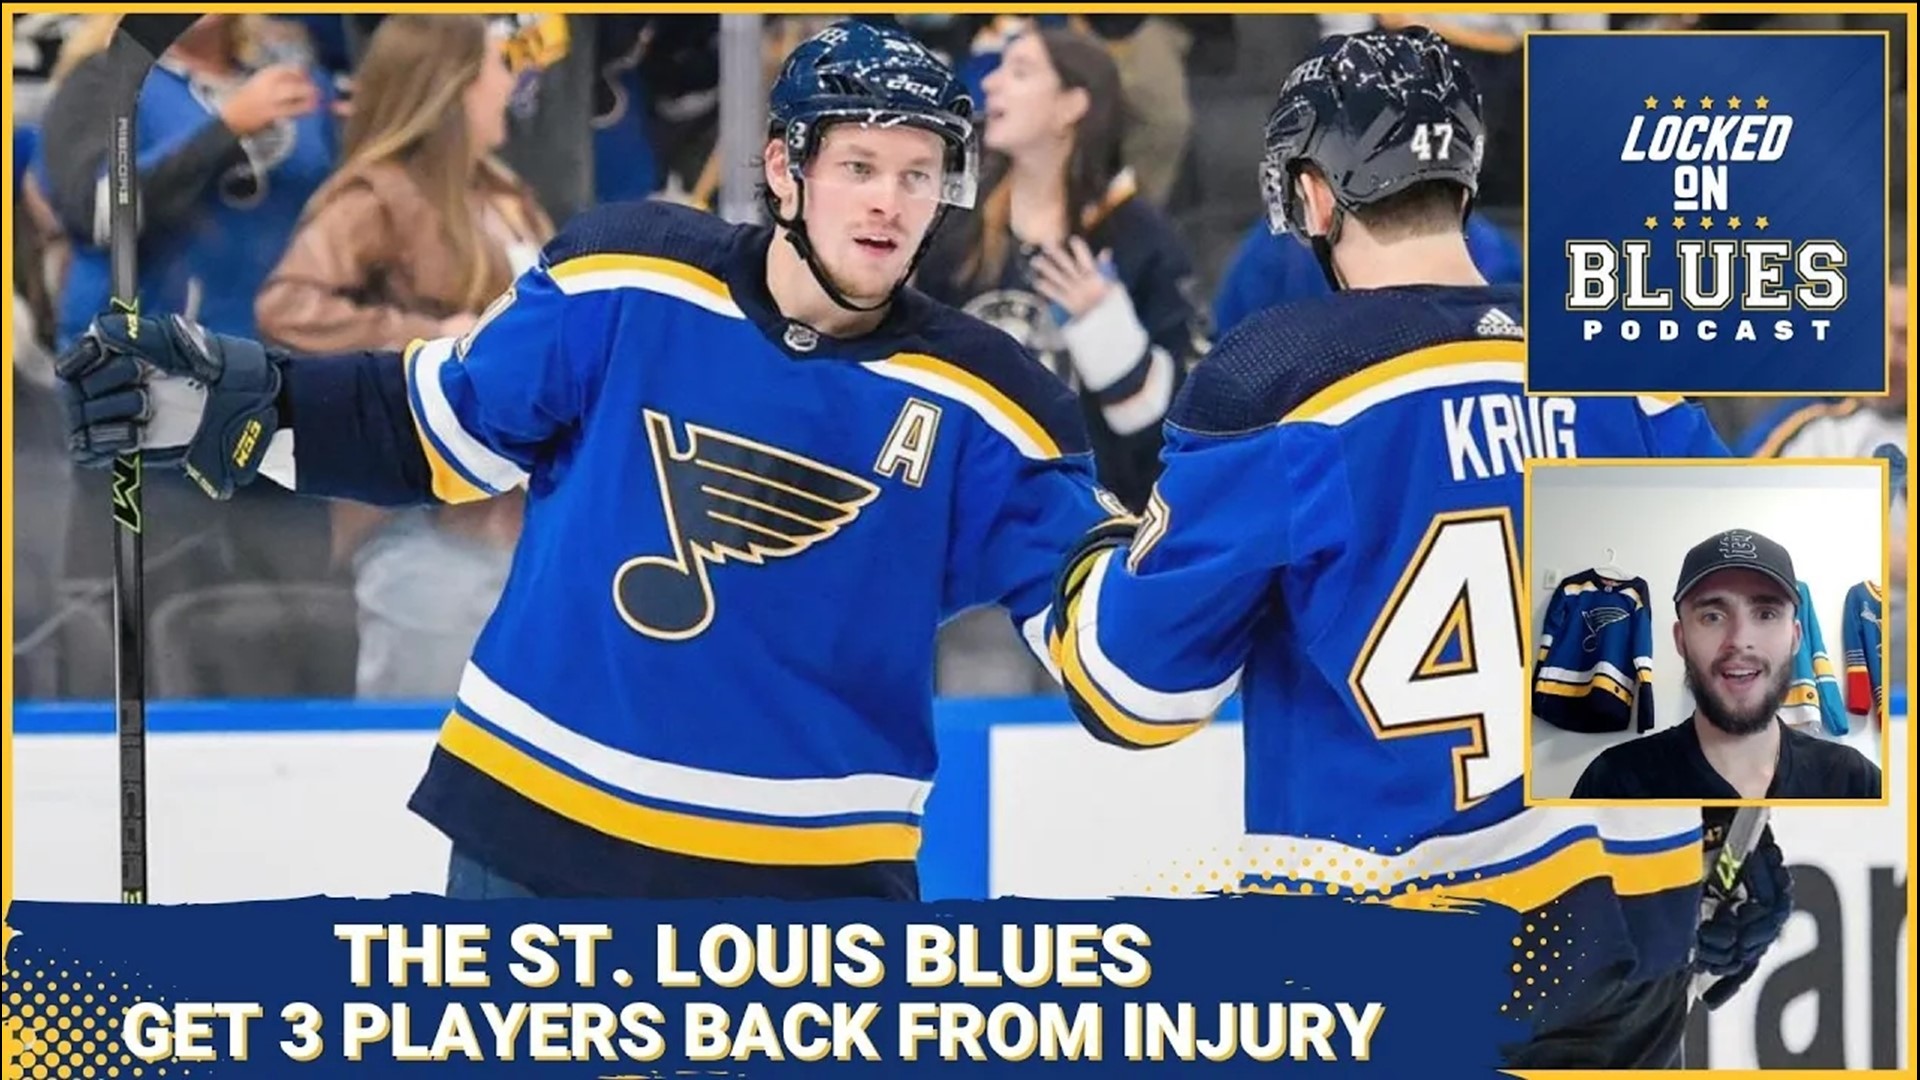 Josh Hyman covers the return of Vladimir Tarasenko, Logan Brown, and Torey Krug. He discusses the injury to Buchnevich and previews the game against the Sabres.